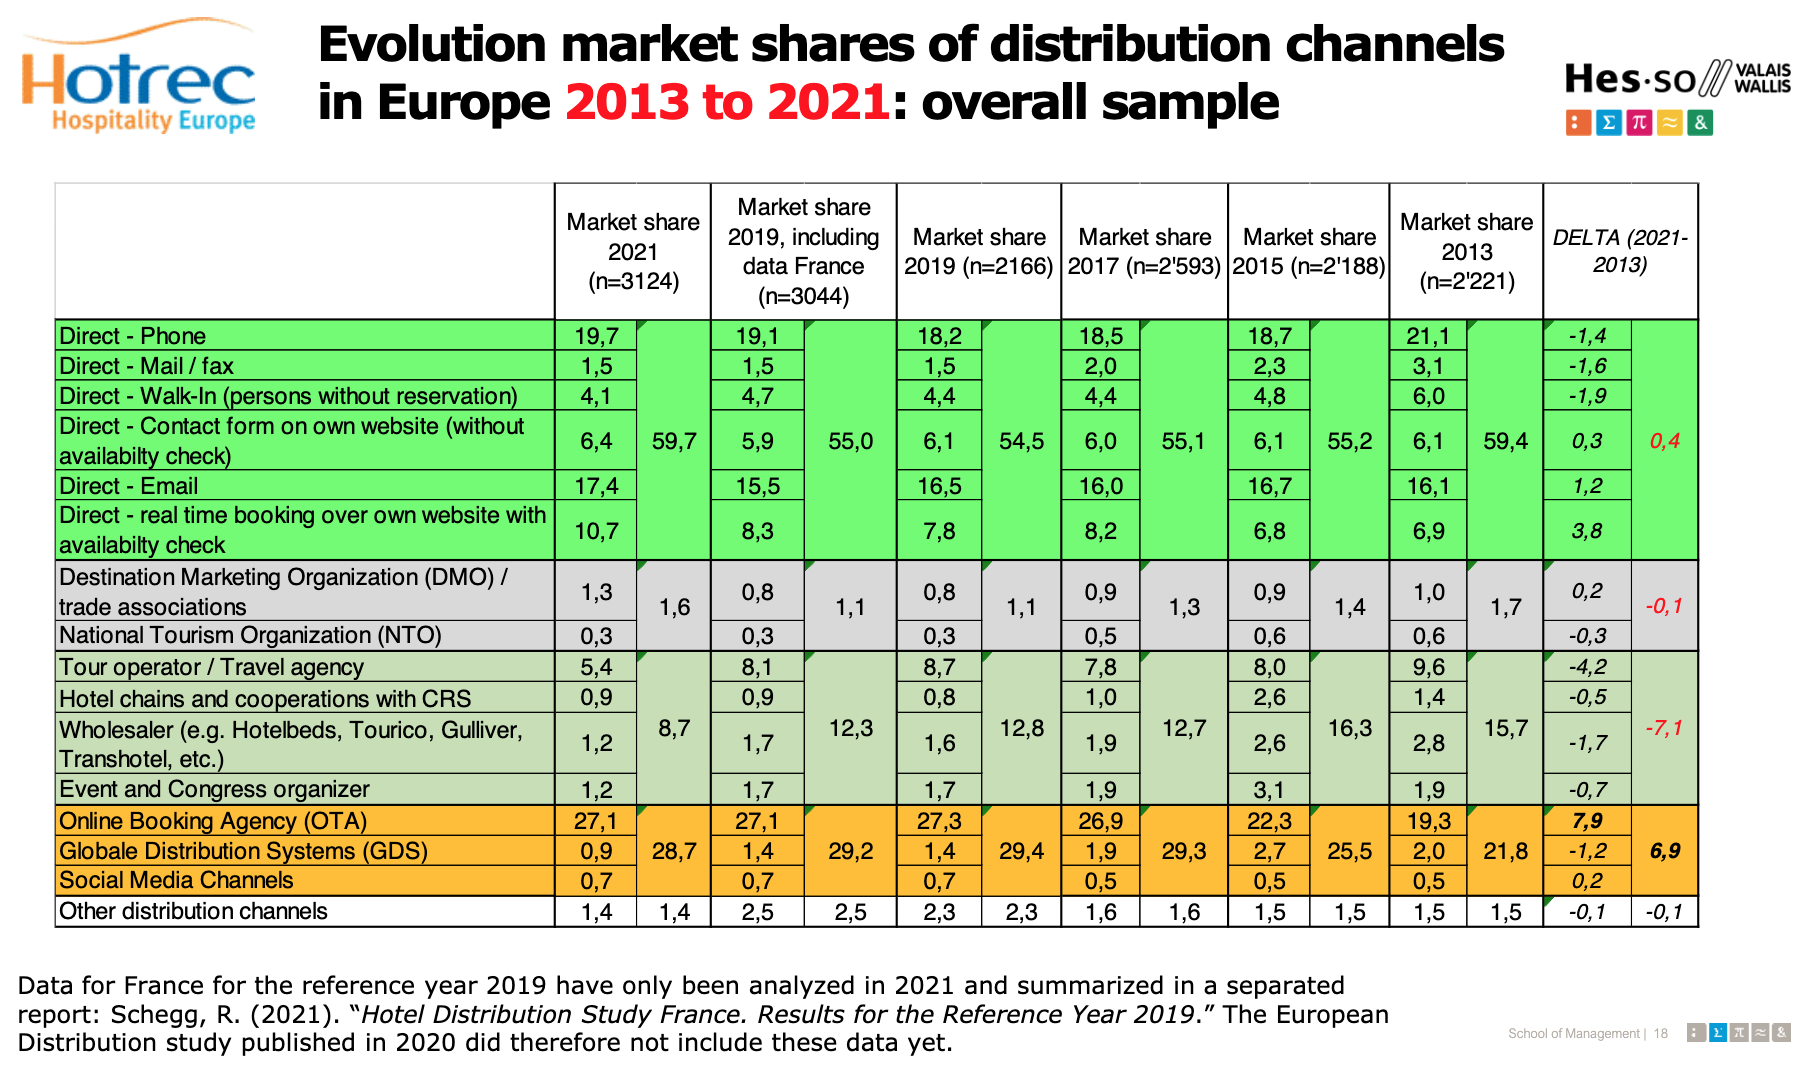 Evolution market shares of distribution channels in Europe 2013 to 2021: overall sample